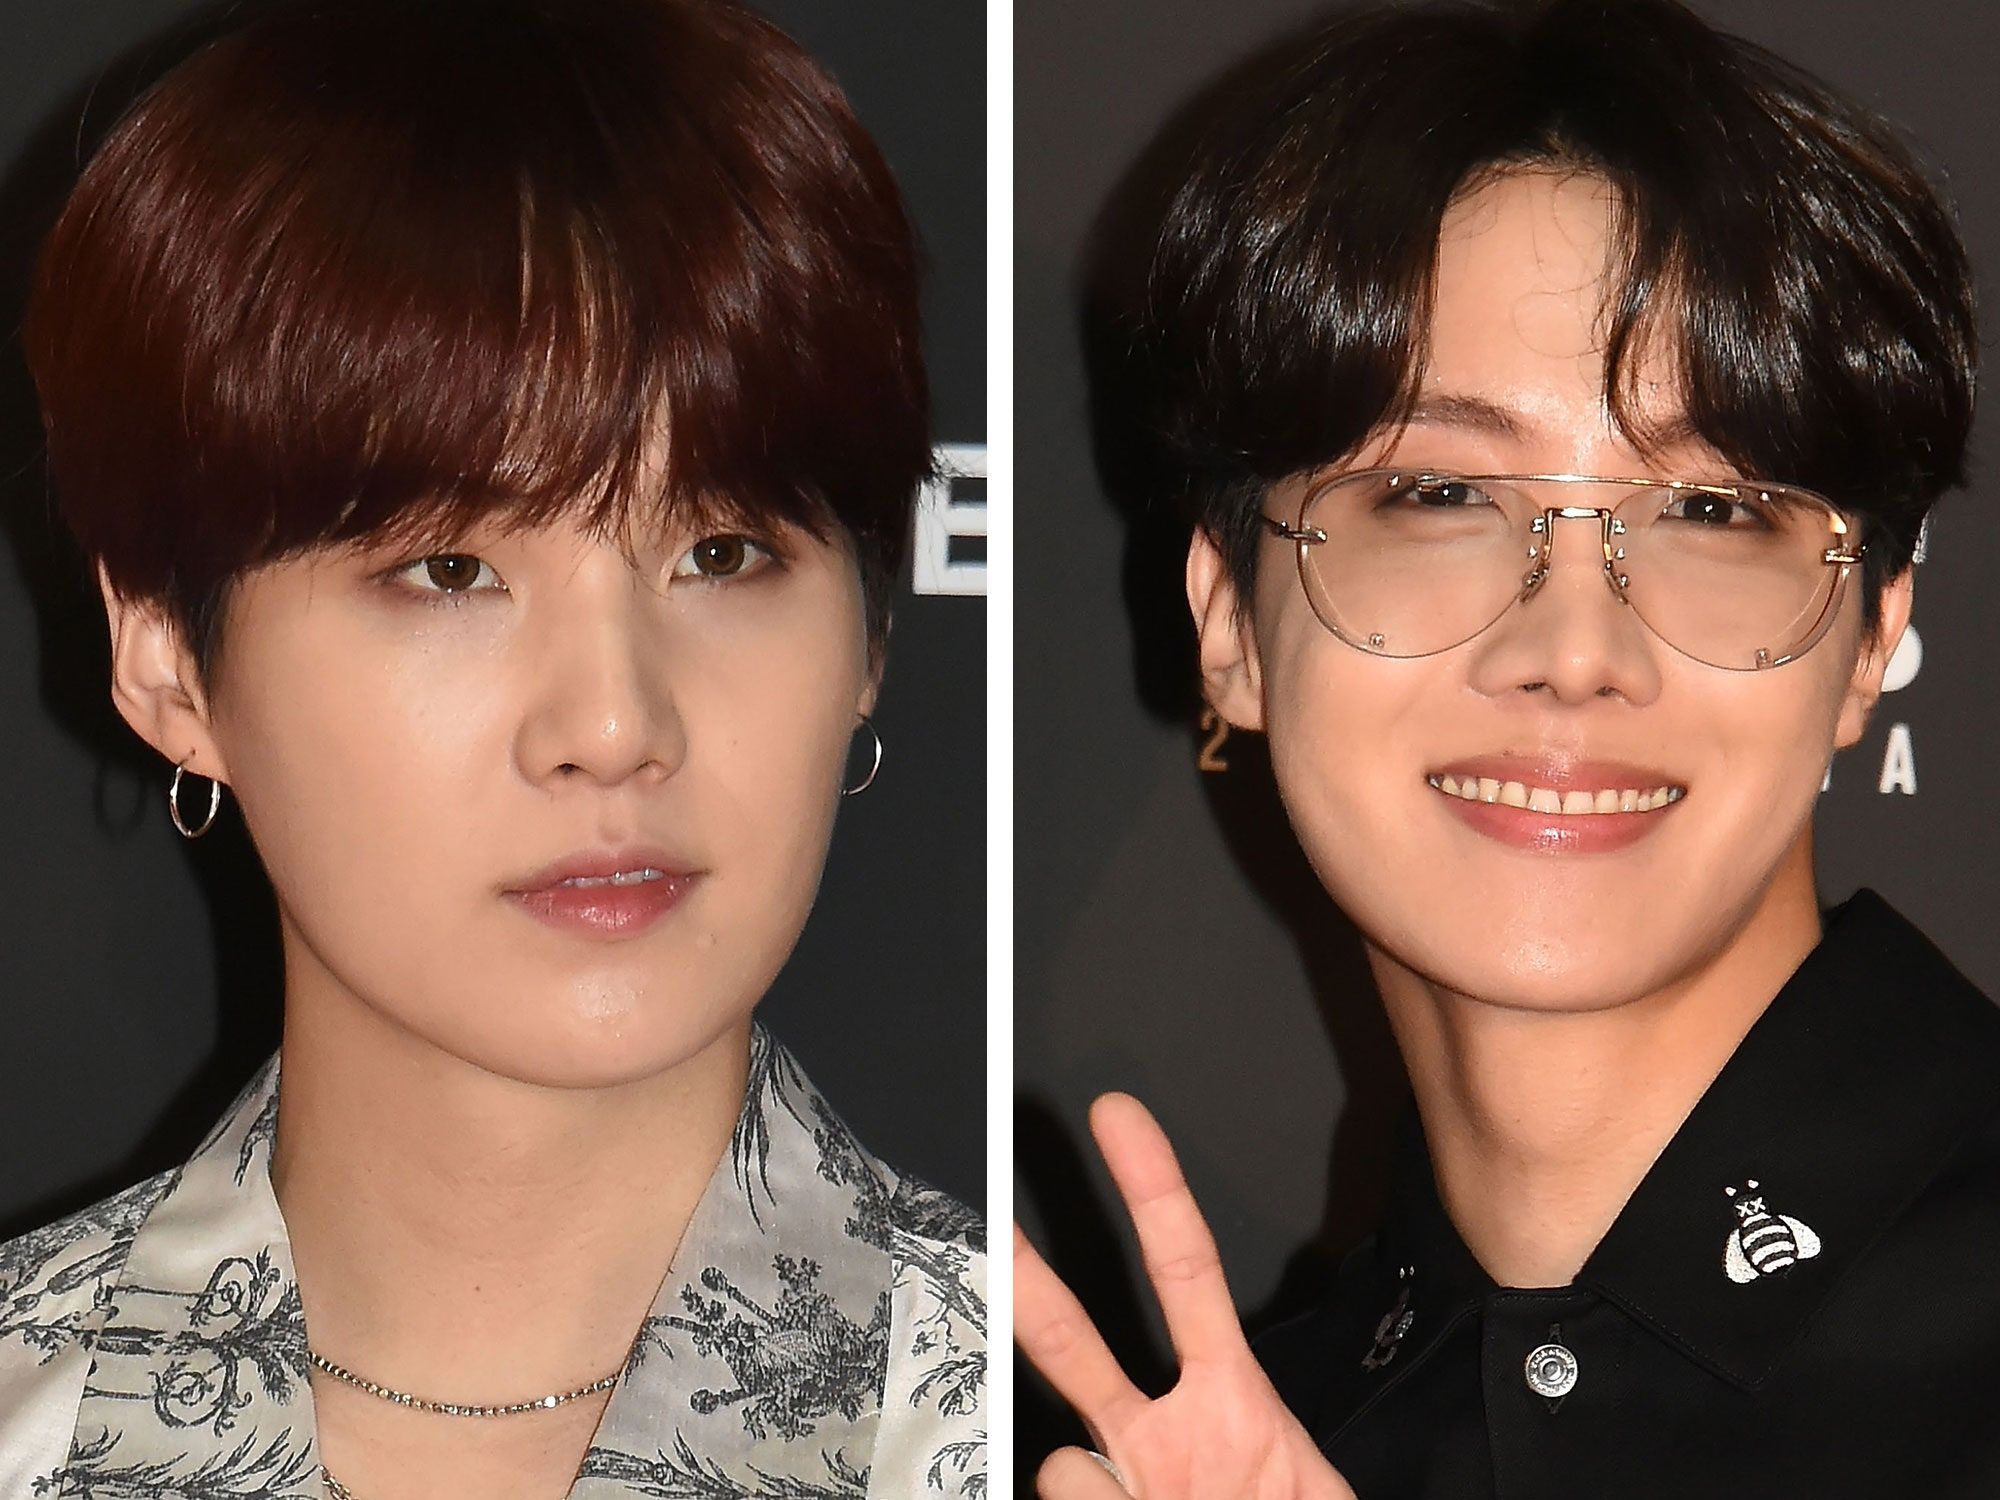 BTS Changed Their Name to “Sope” for April Fools' Day to Celebrate